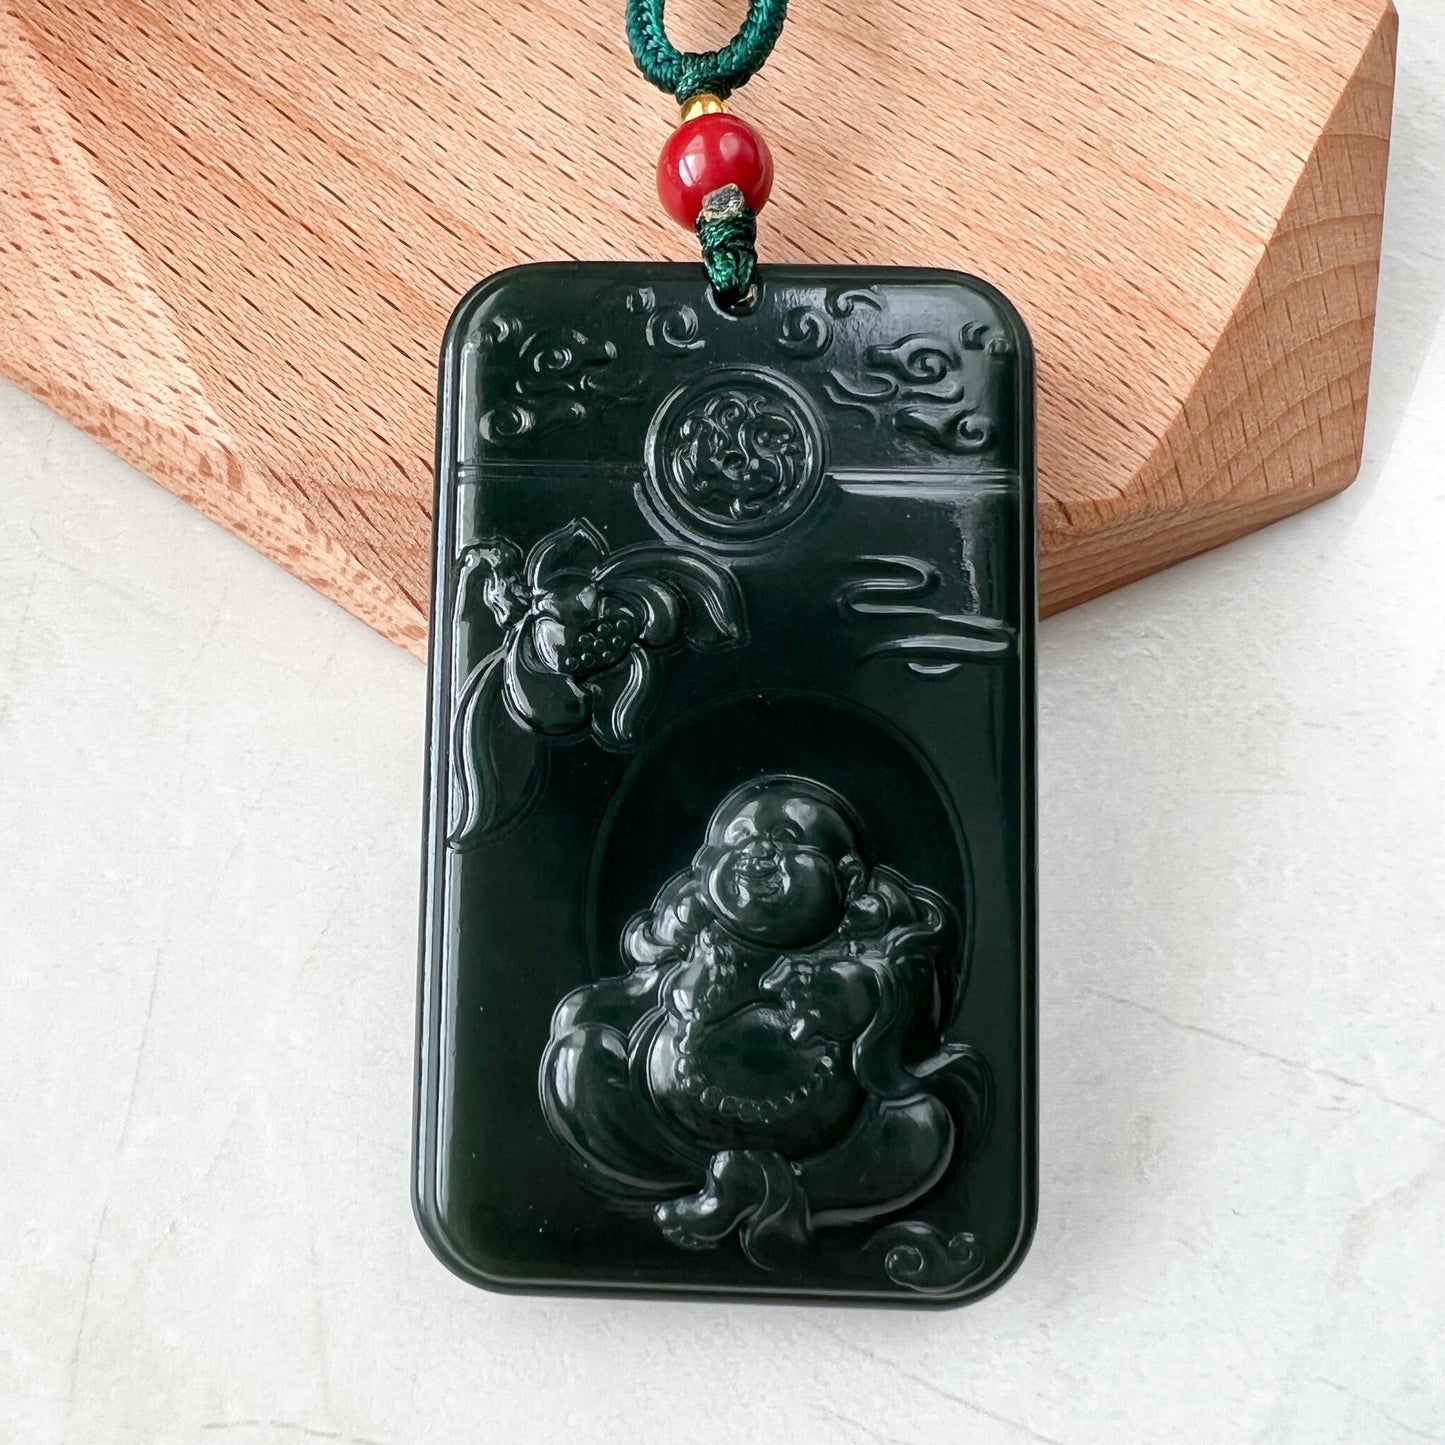 Dark Green Black Nephrite Jade Happy Laughing Buddha Necklace, SY-1221-1647872375 - AriaDesignCollection